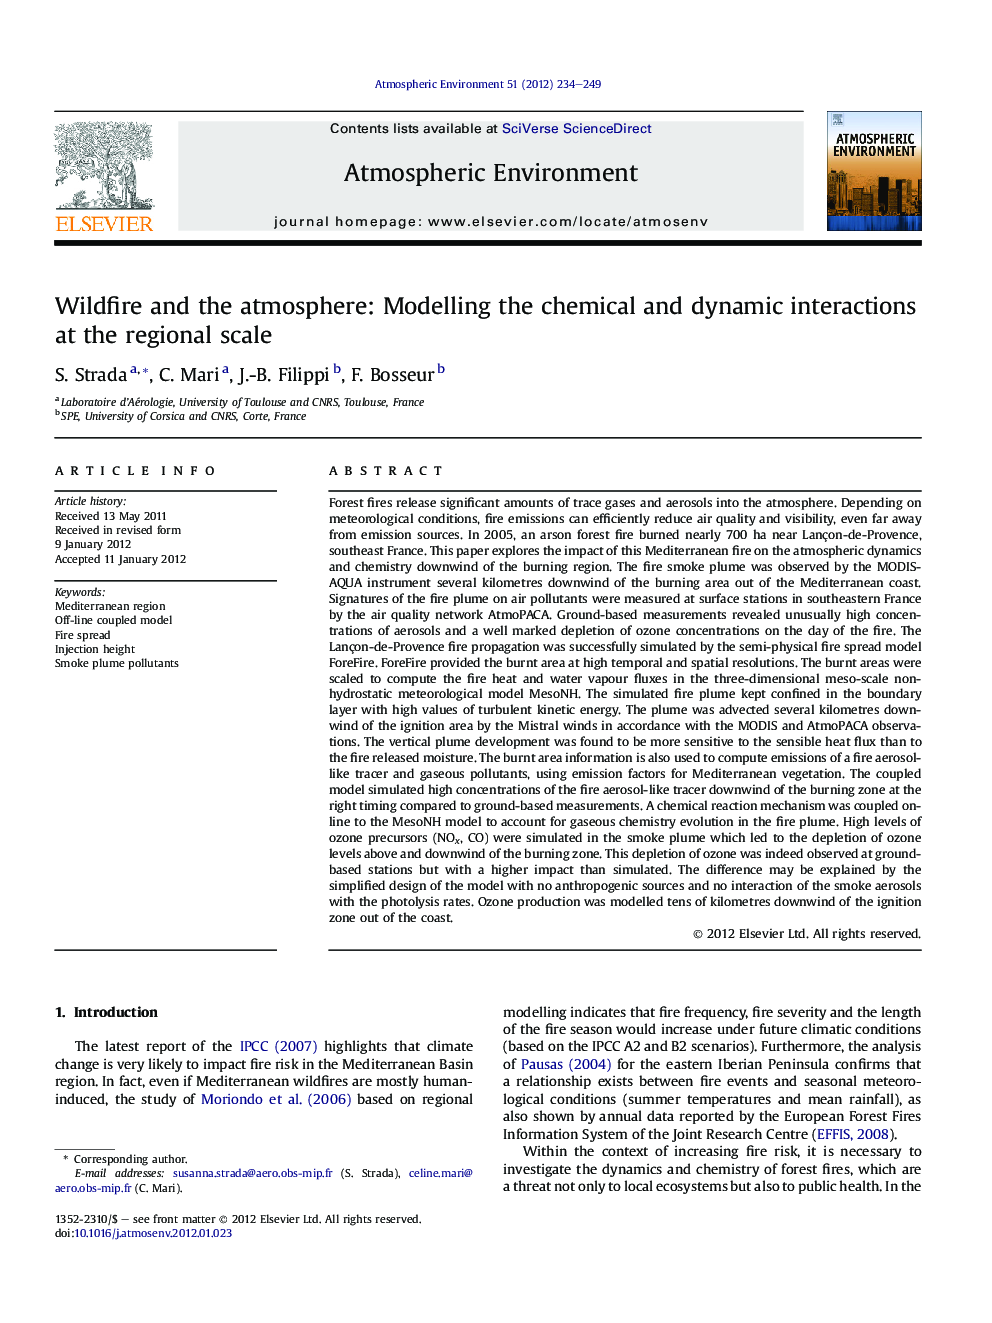 Wildfire and the atmosphere: Modelling the chemical and dynamic interactions at the regional scale